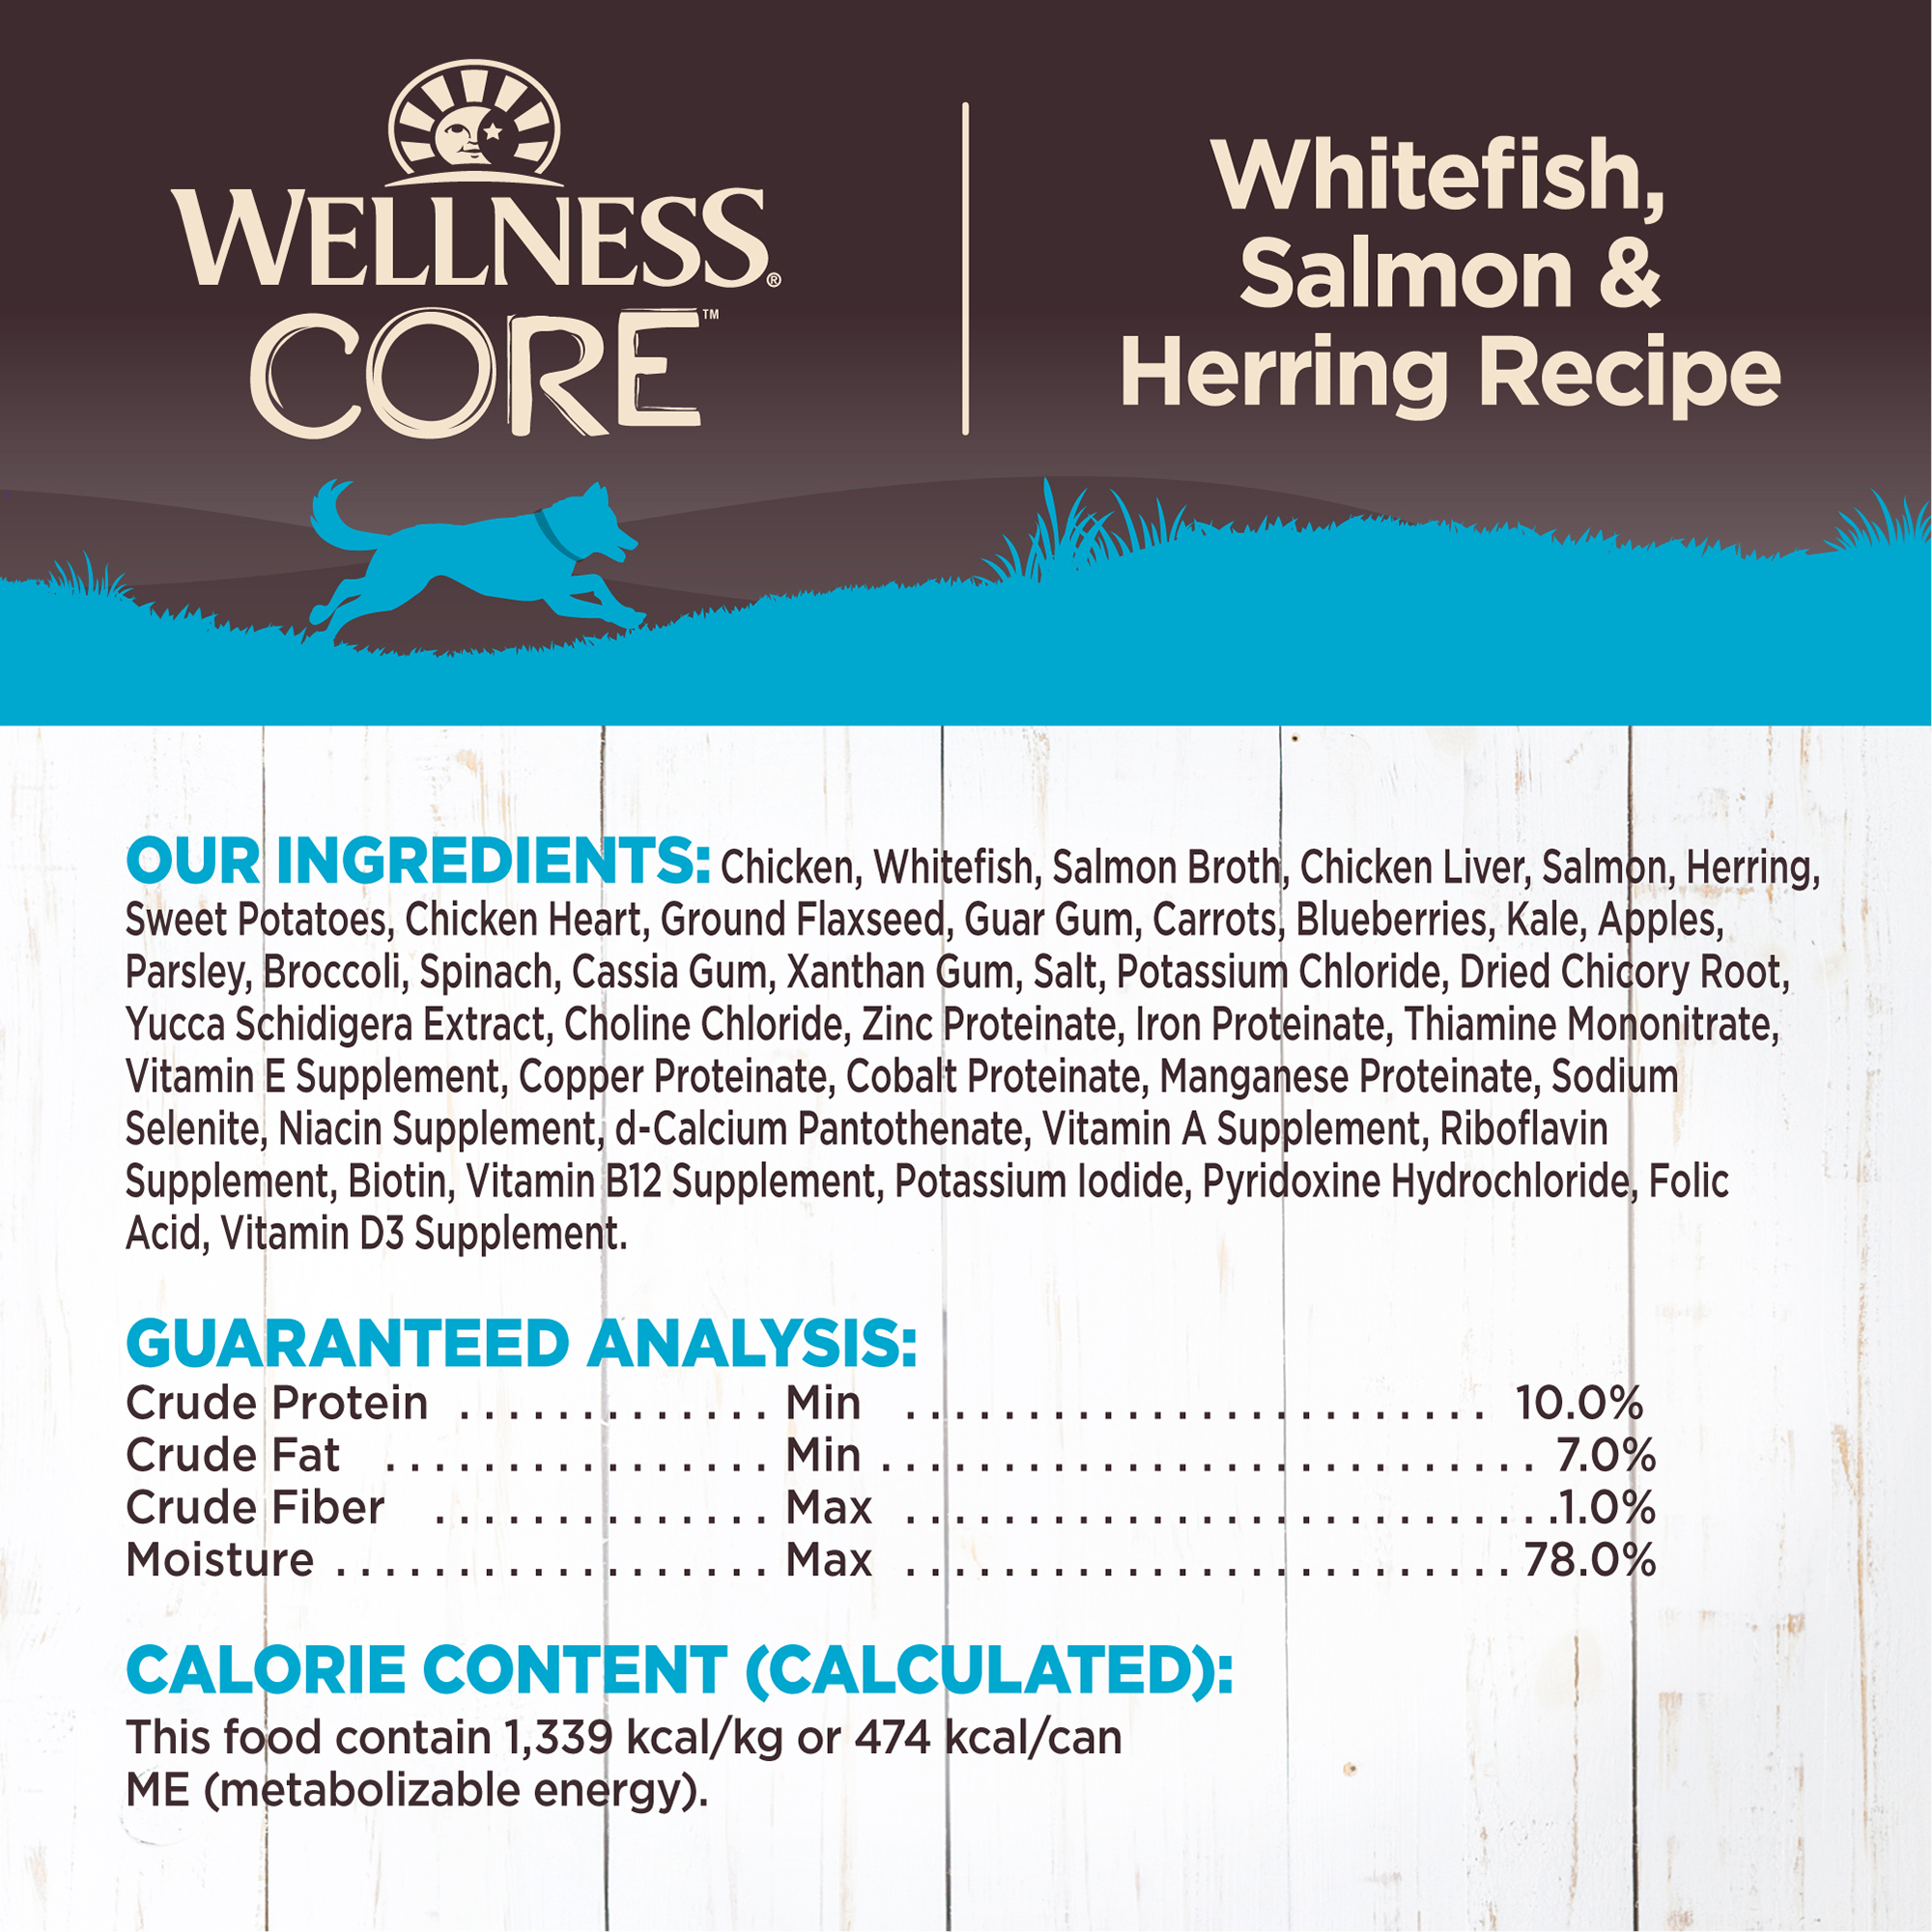 Wellness CORE Natural Wet Grain Free Canned Dog Food, Whitefish, Salmon & Herring, 12.5-Ounce Can (Pack of 12) - image 5 of 7